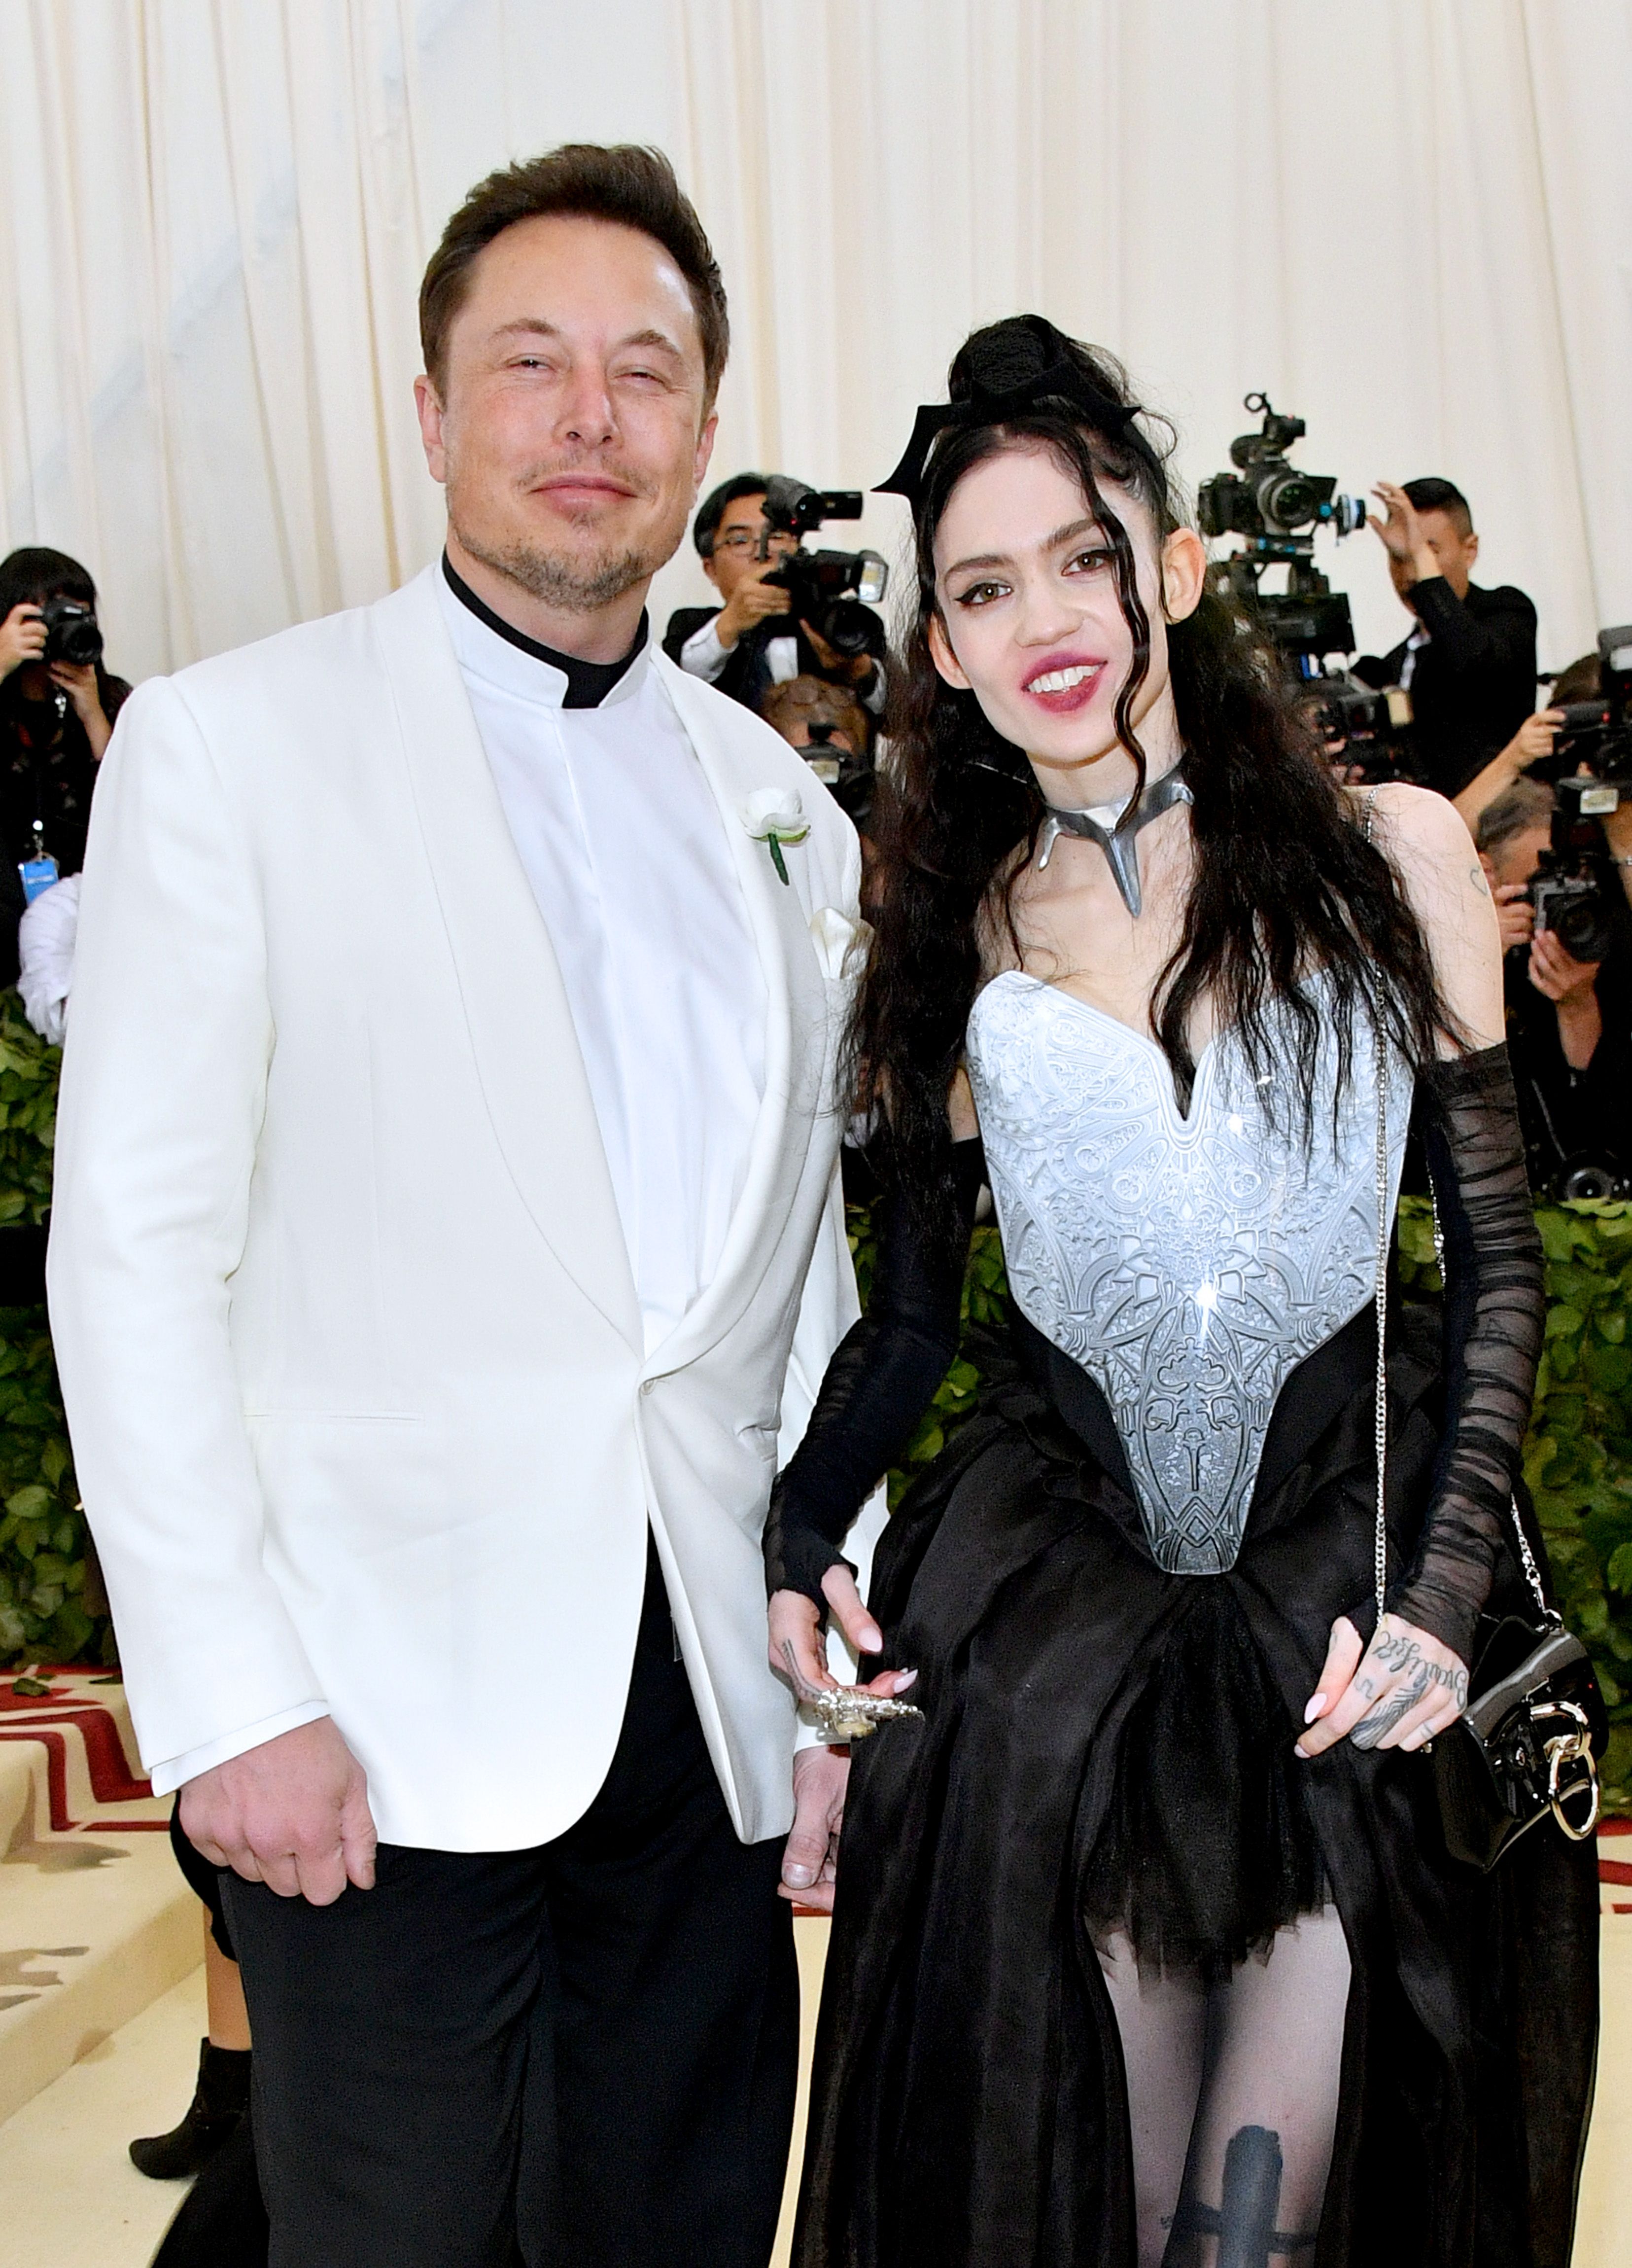 Grimes Welcomes Baby Boy Elon Musk Shares First Baby Photos